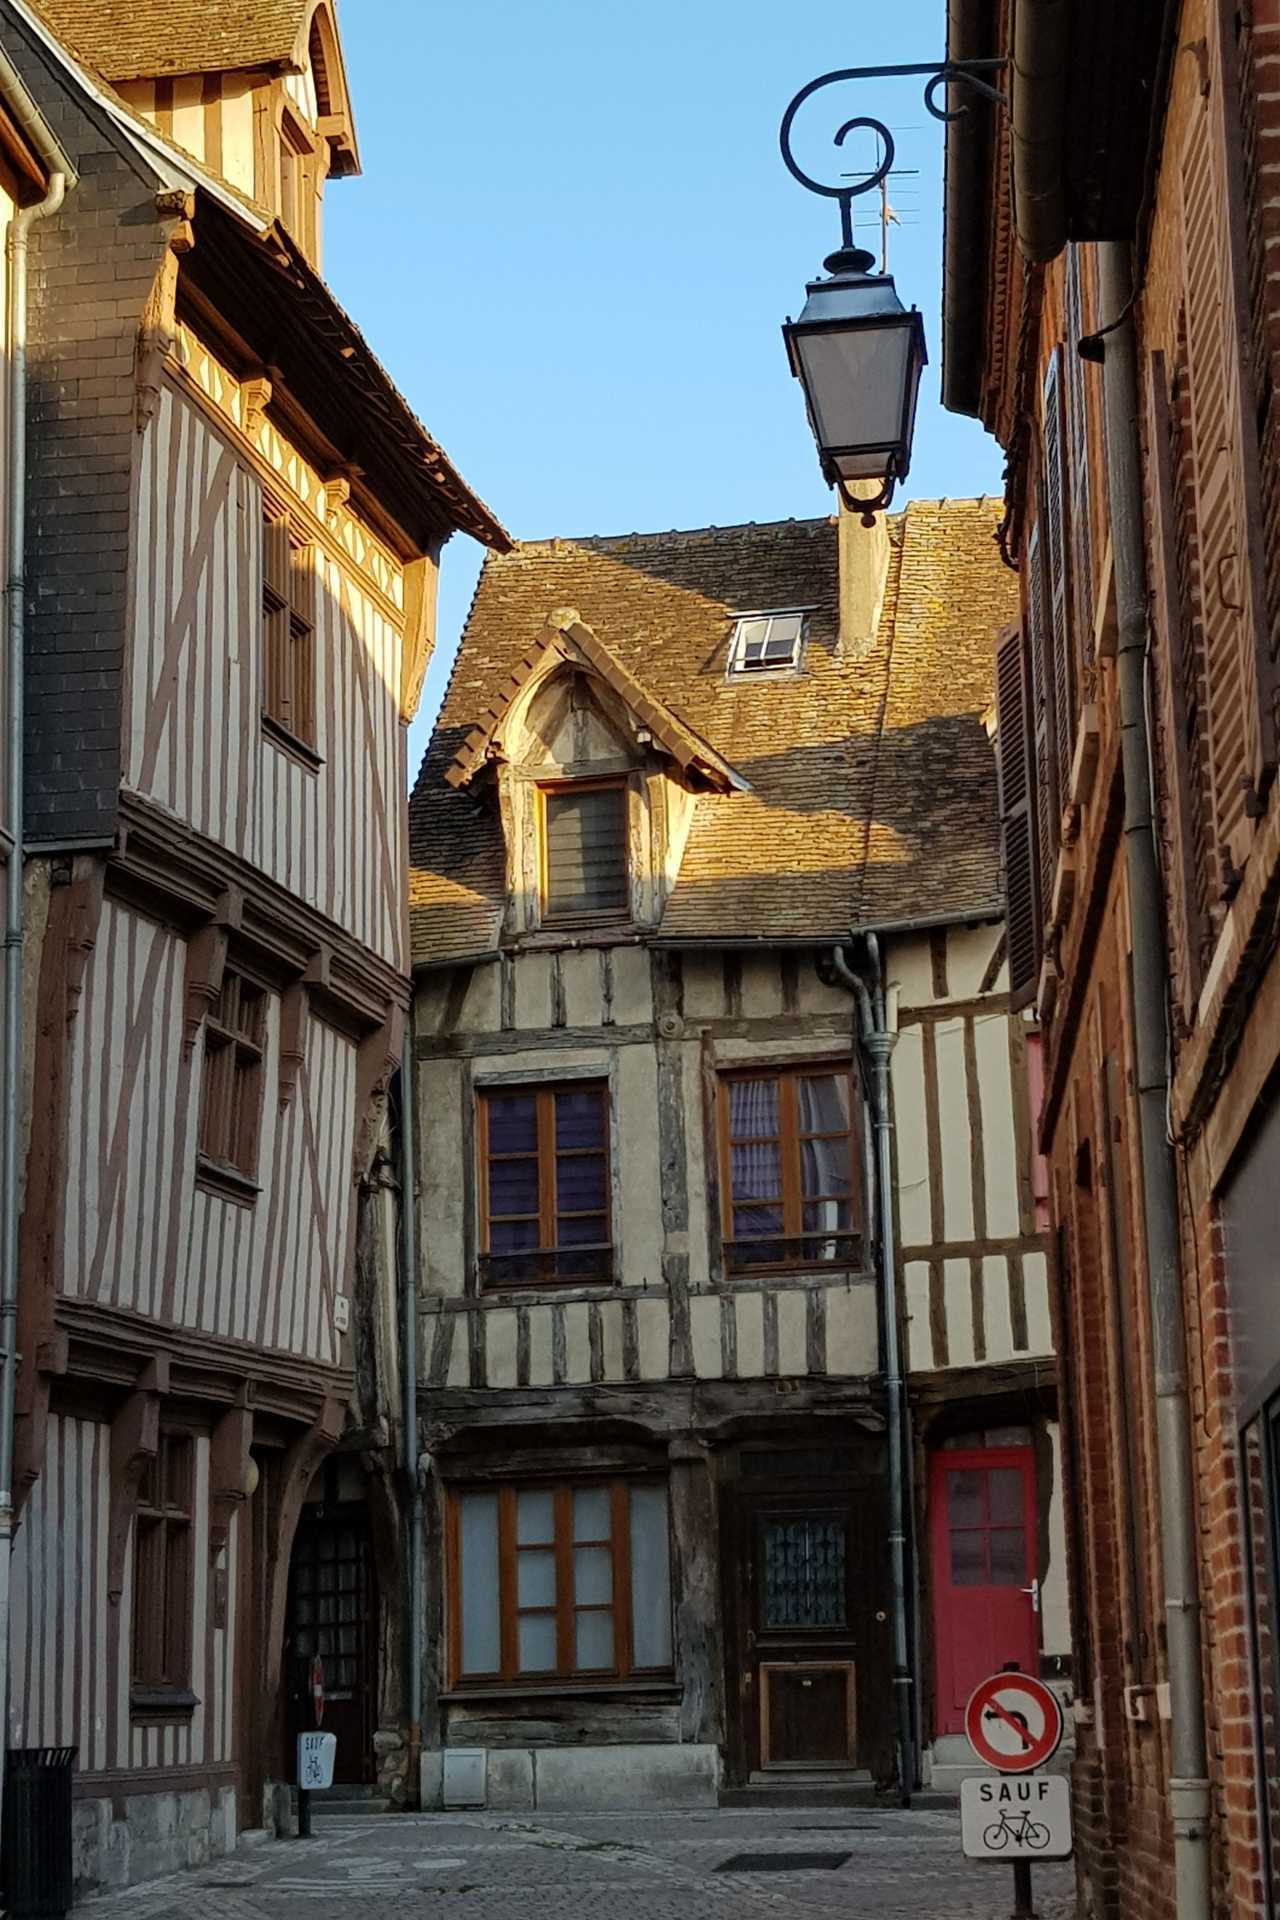 Normandy: old-school architecture